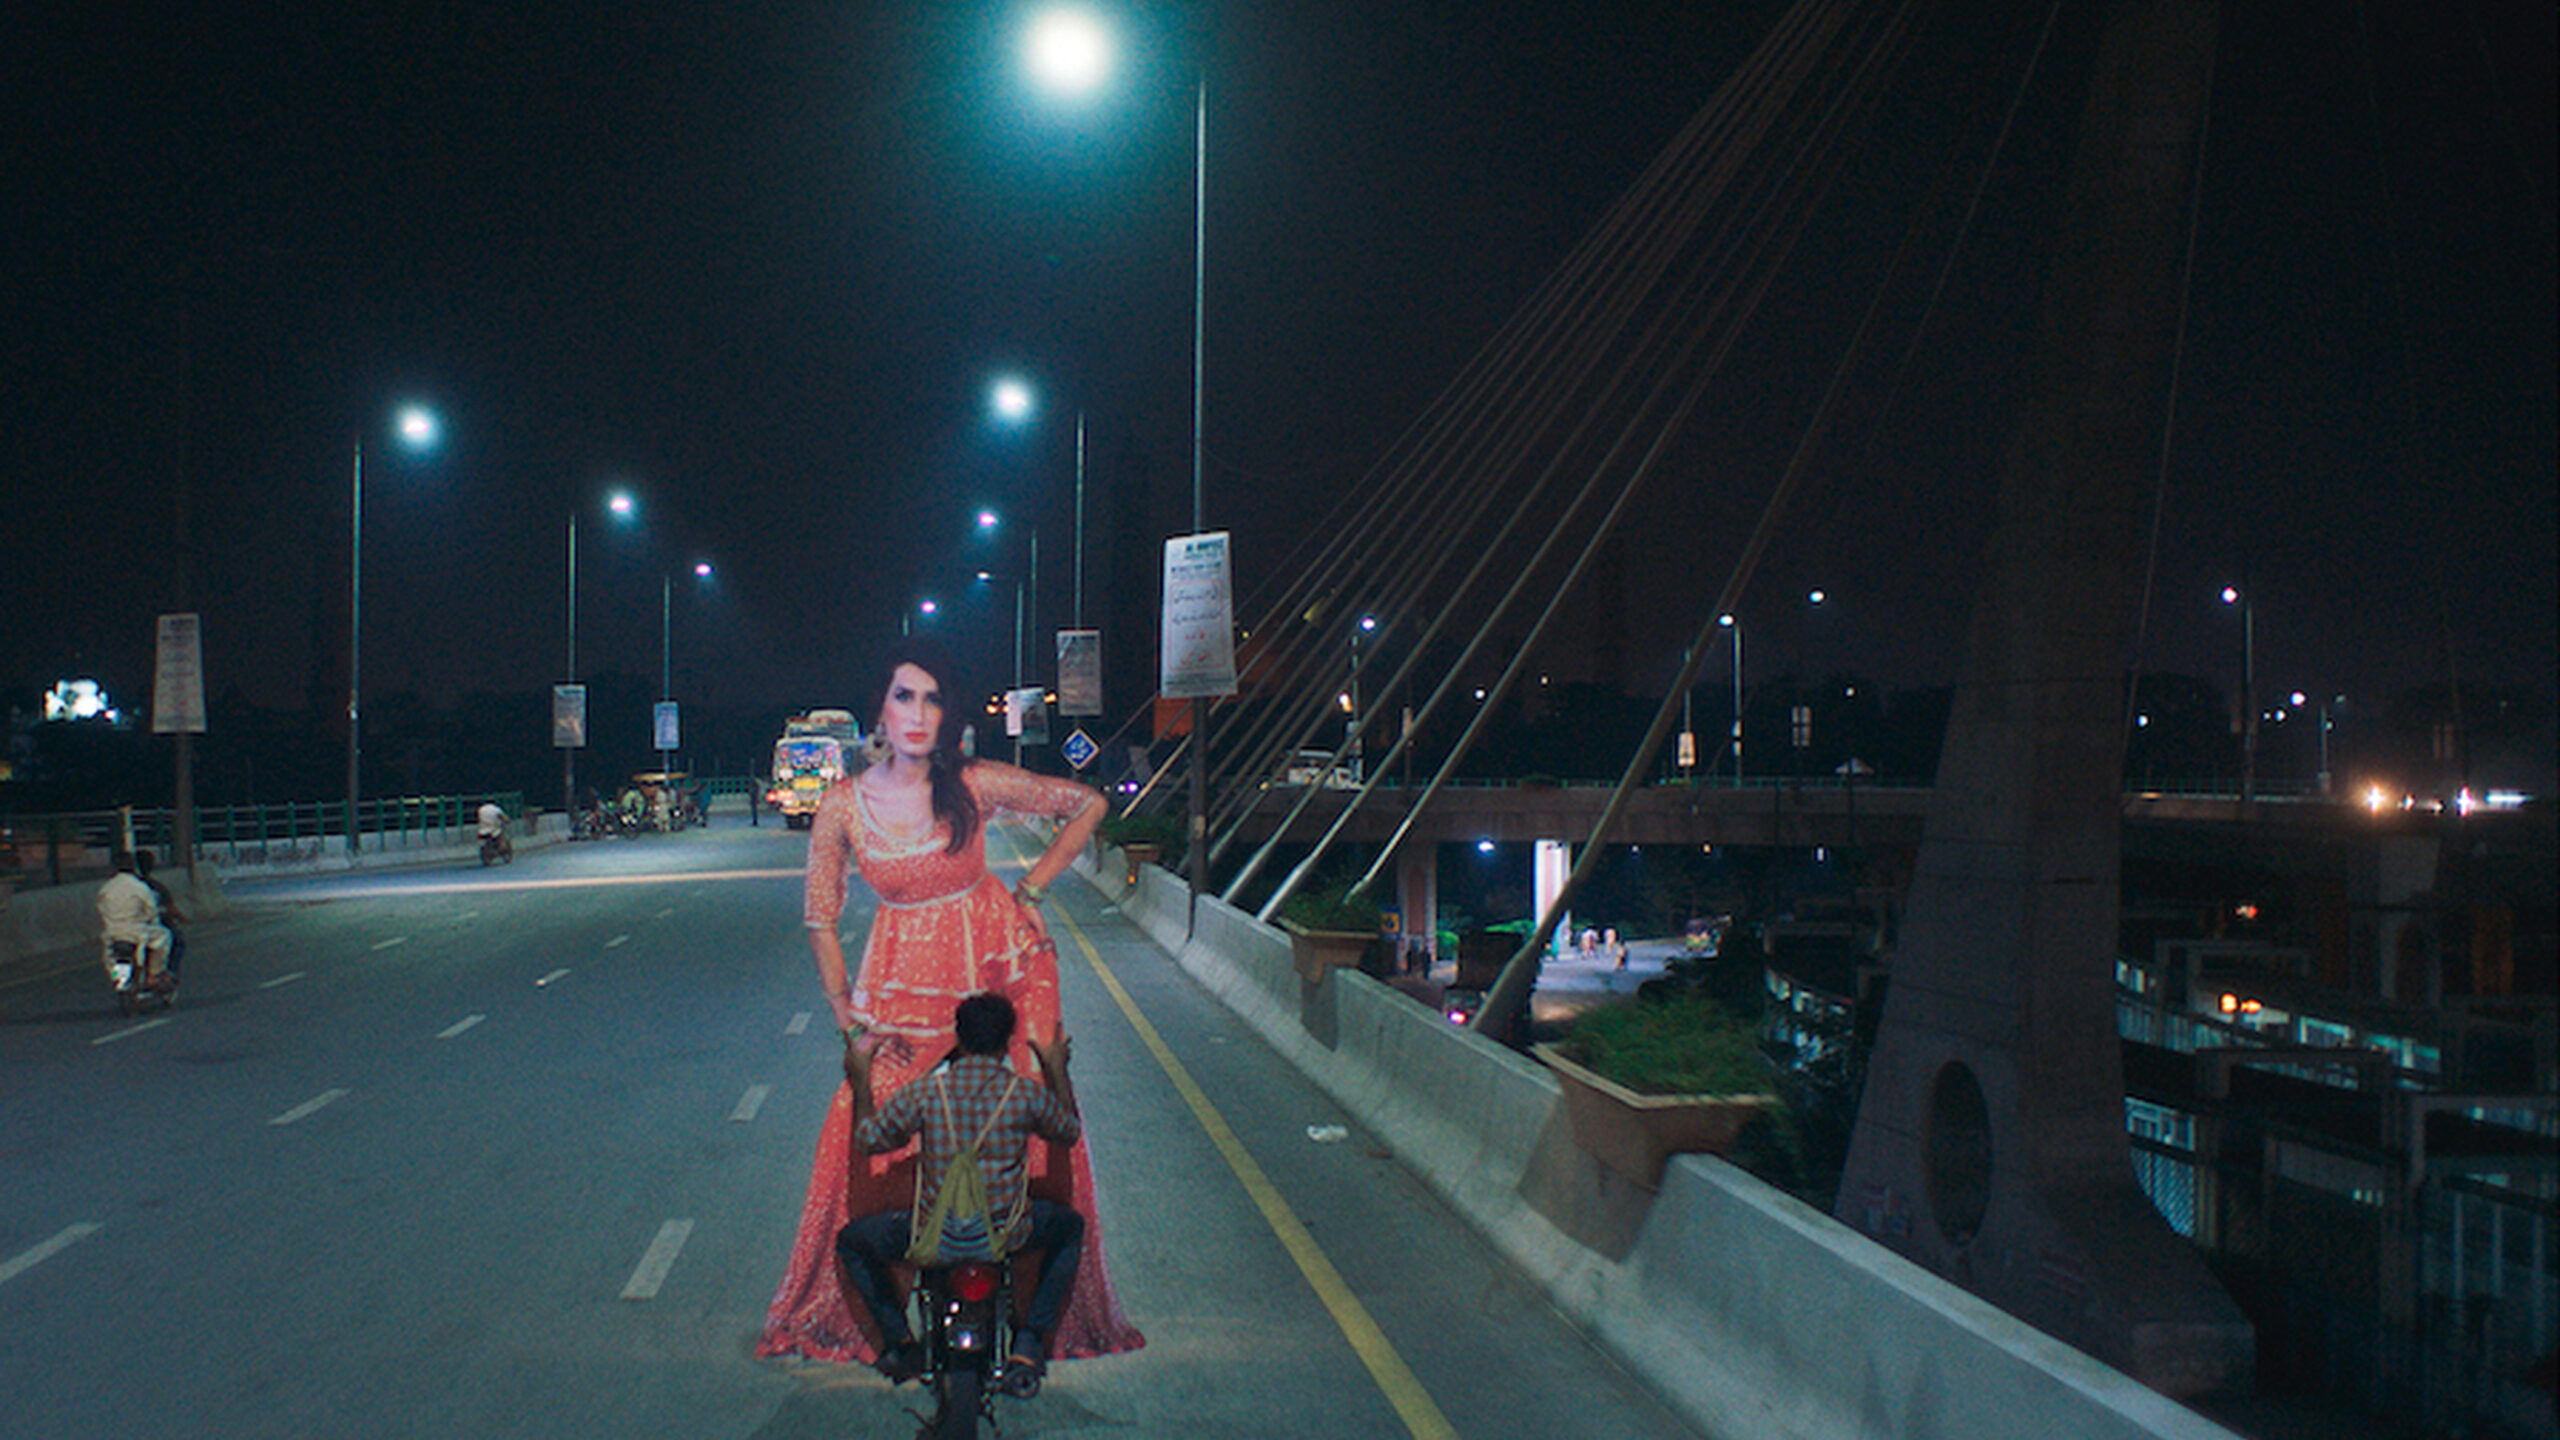 A night scene of a man holding a large cut out of a woman whilst riding a moped across a bridge.